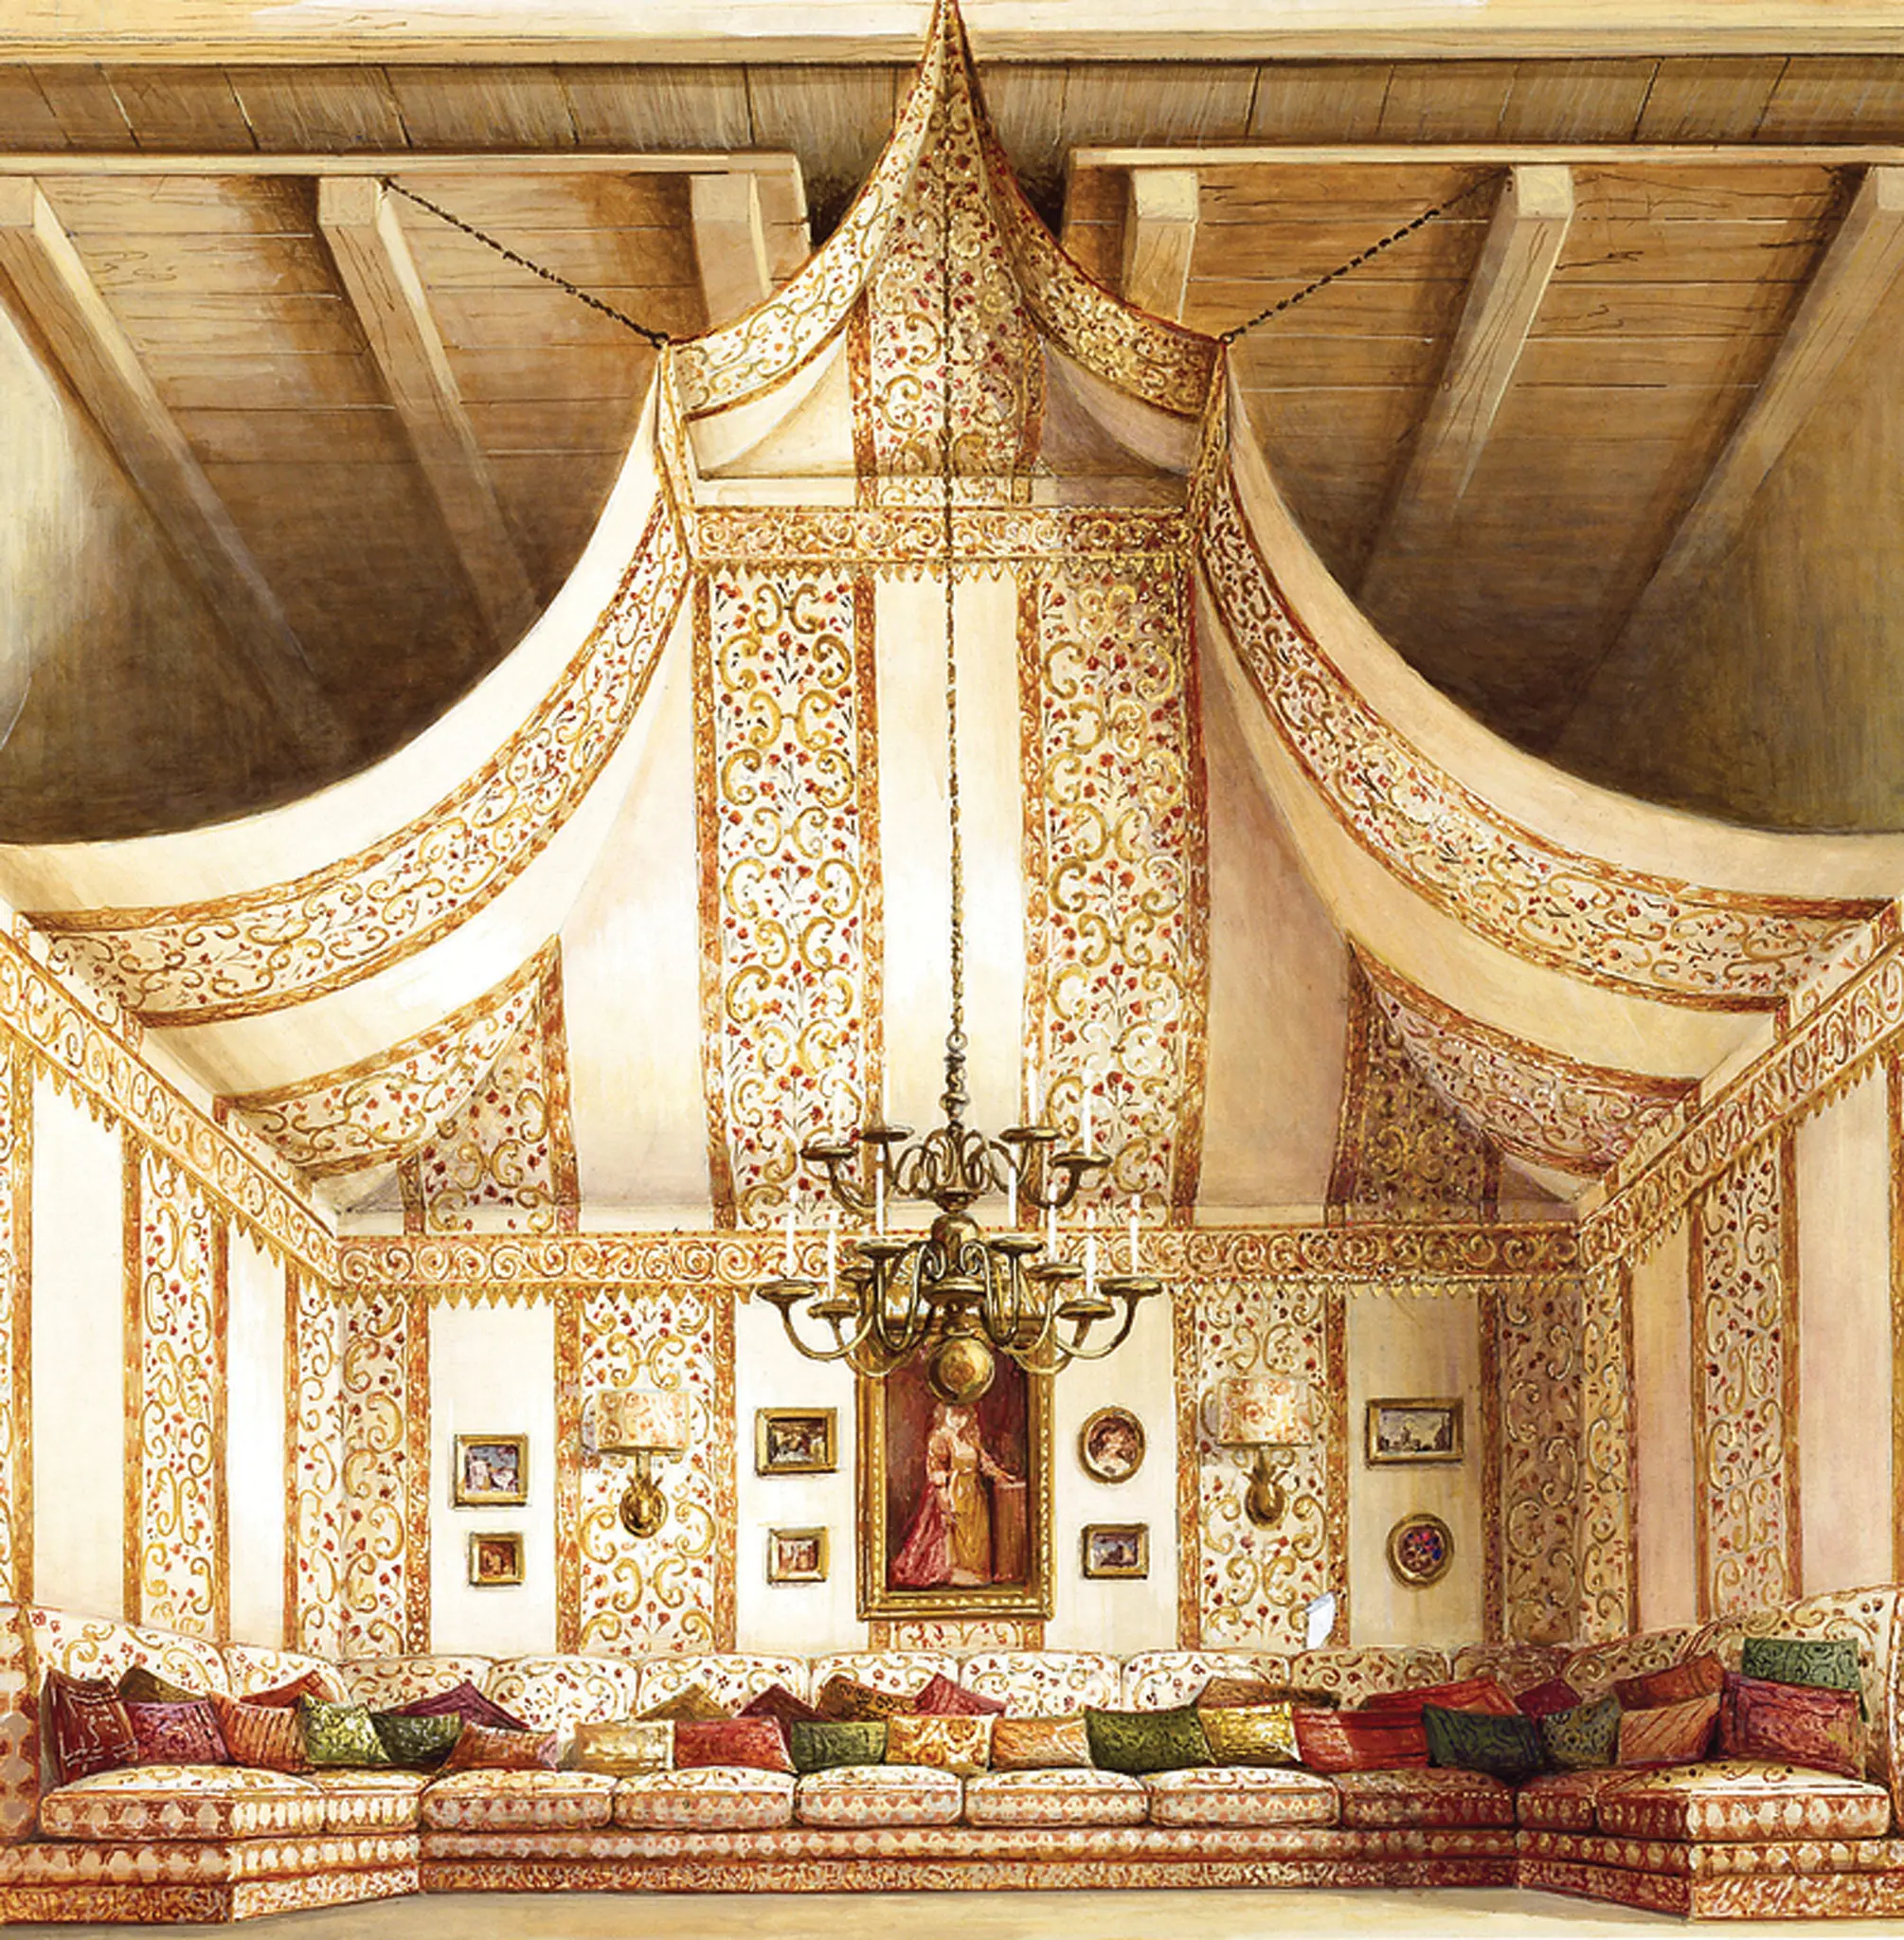 A 1974 drawing of a tented room at Count Rodolfo Crespi’s apartment in Rome. Romolo Paganelli/Renzo Mongiardino archive/Photo: Massimo Listri